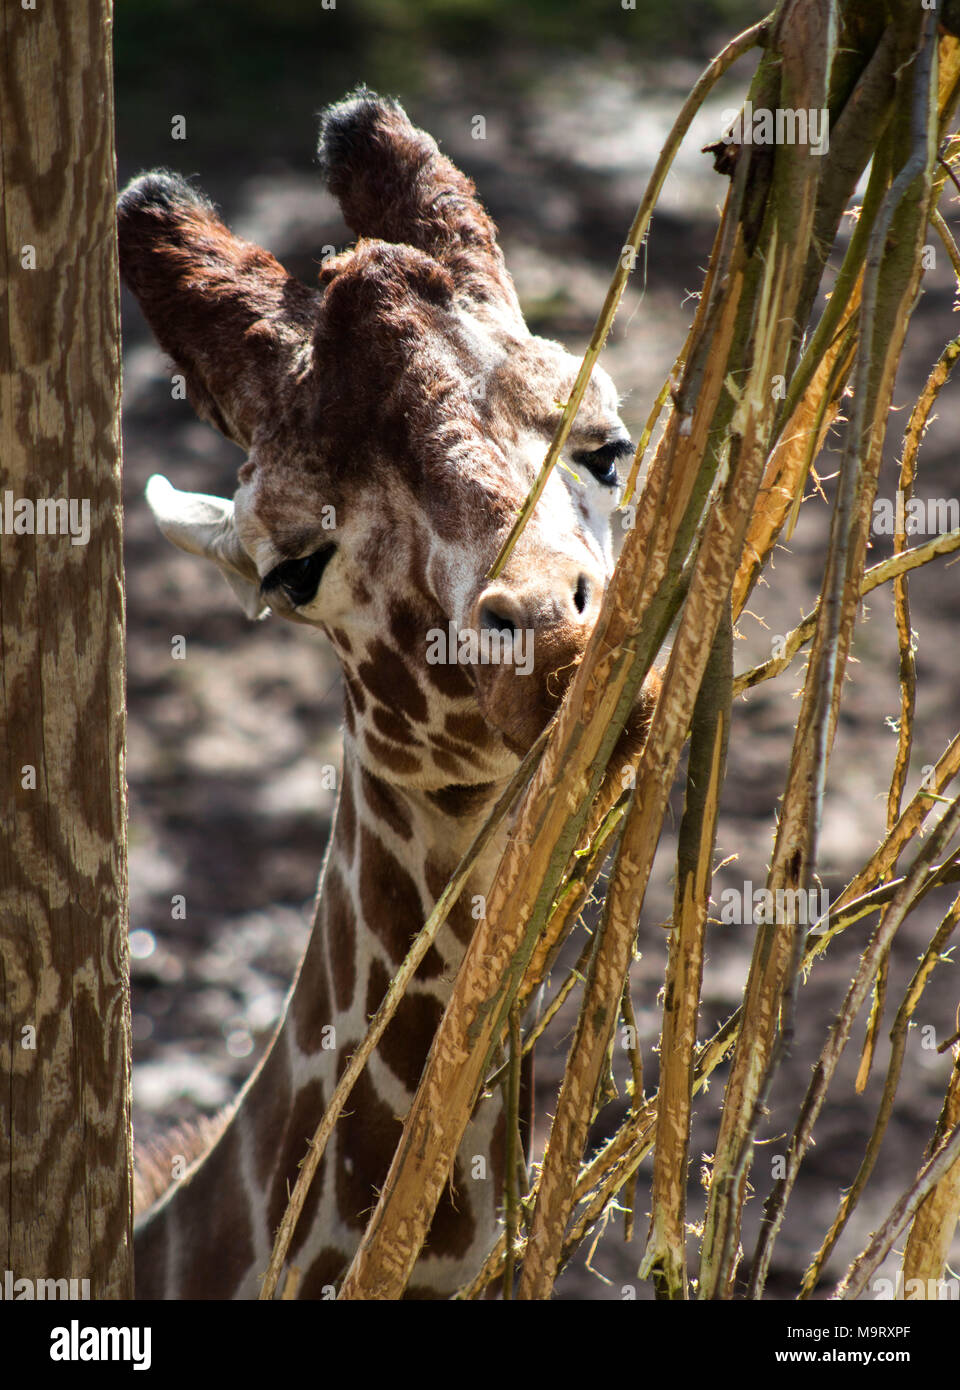 Giraffe Feeding from a hanging twigs in tree, Yorkshire, UK Stock Photo